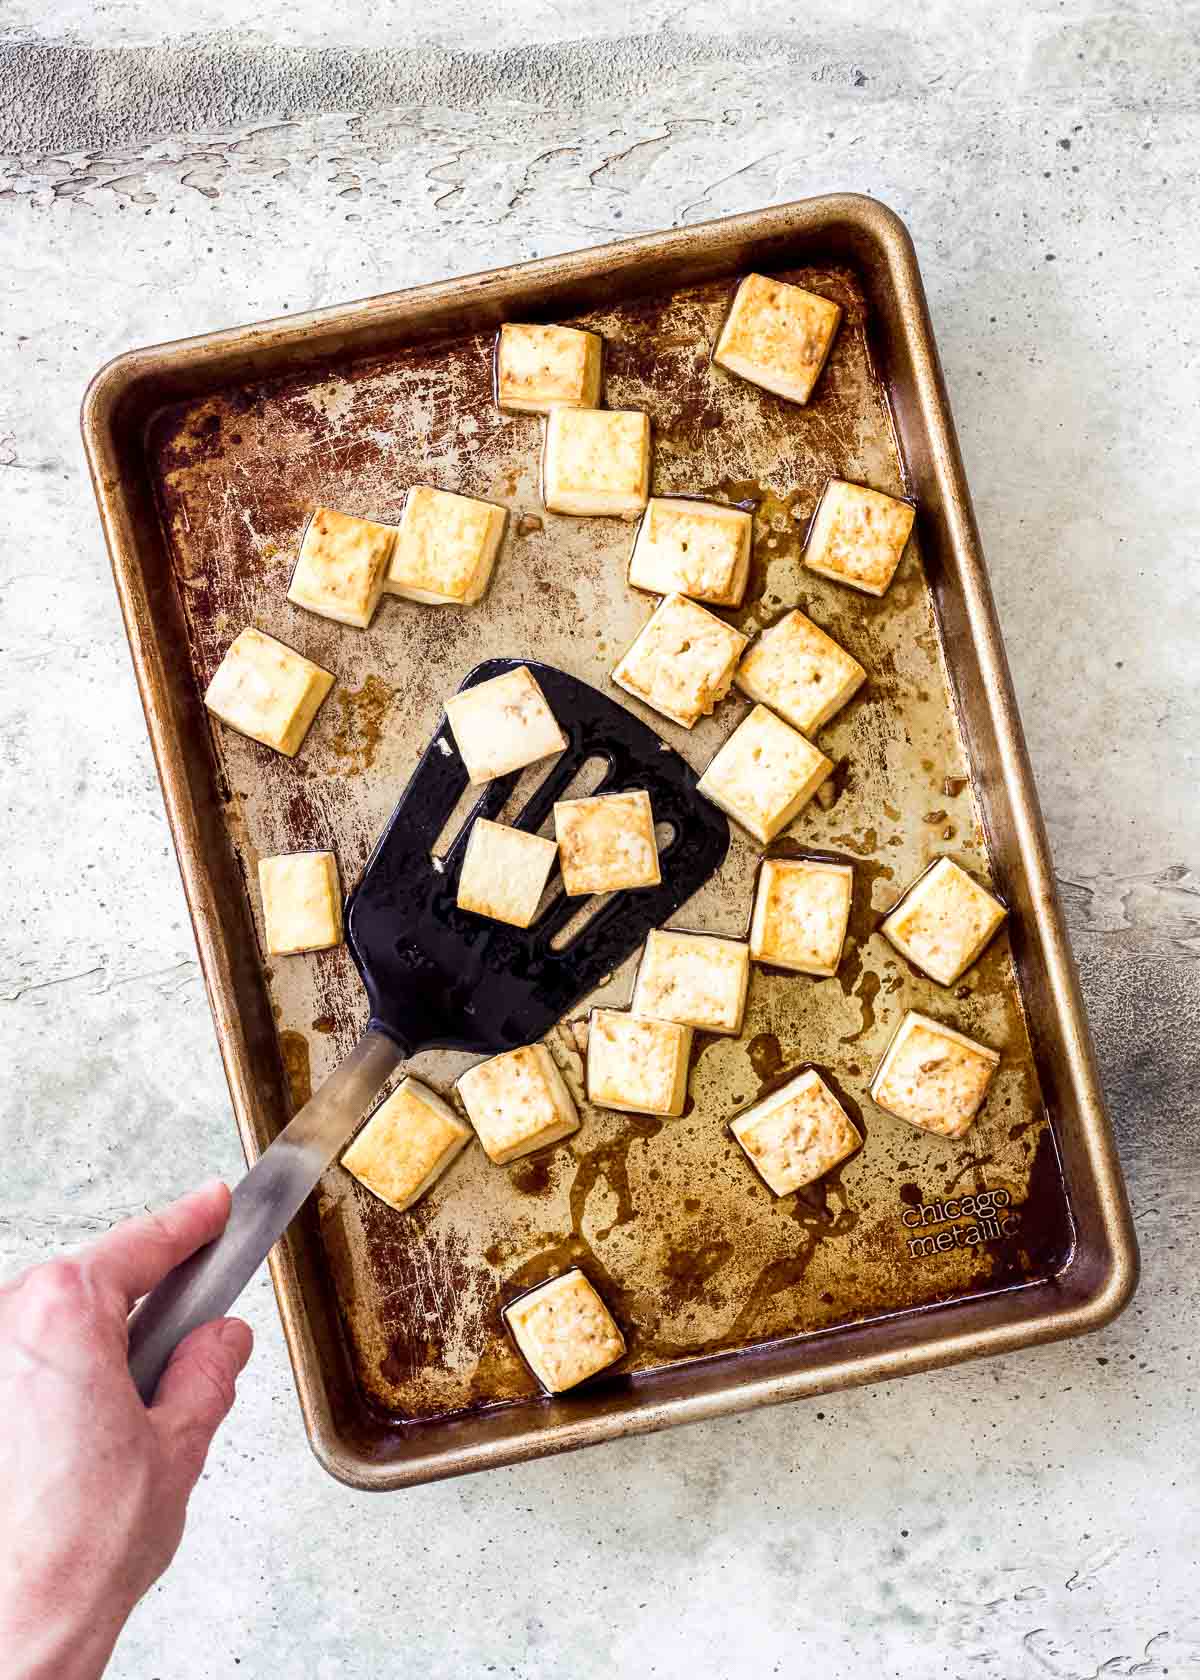 Tray of crispy broiled tofu being flipped with spatula by female hand.